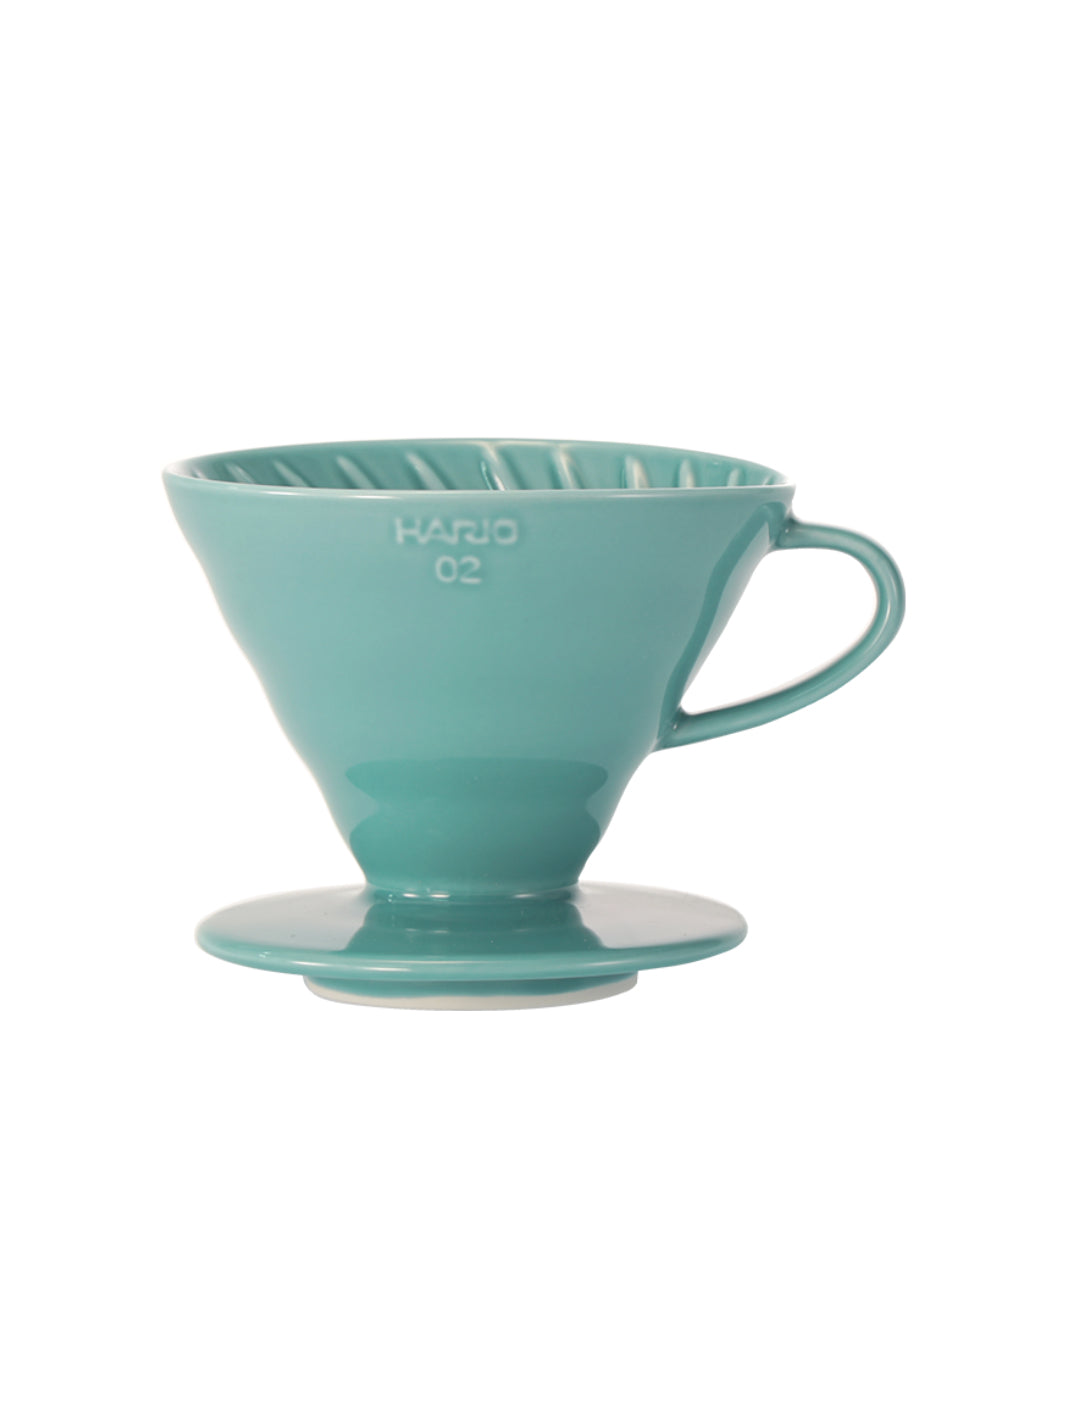 Set of 4 Ceramic Measuring Cups, Mint Green with Blue Drips by